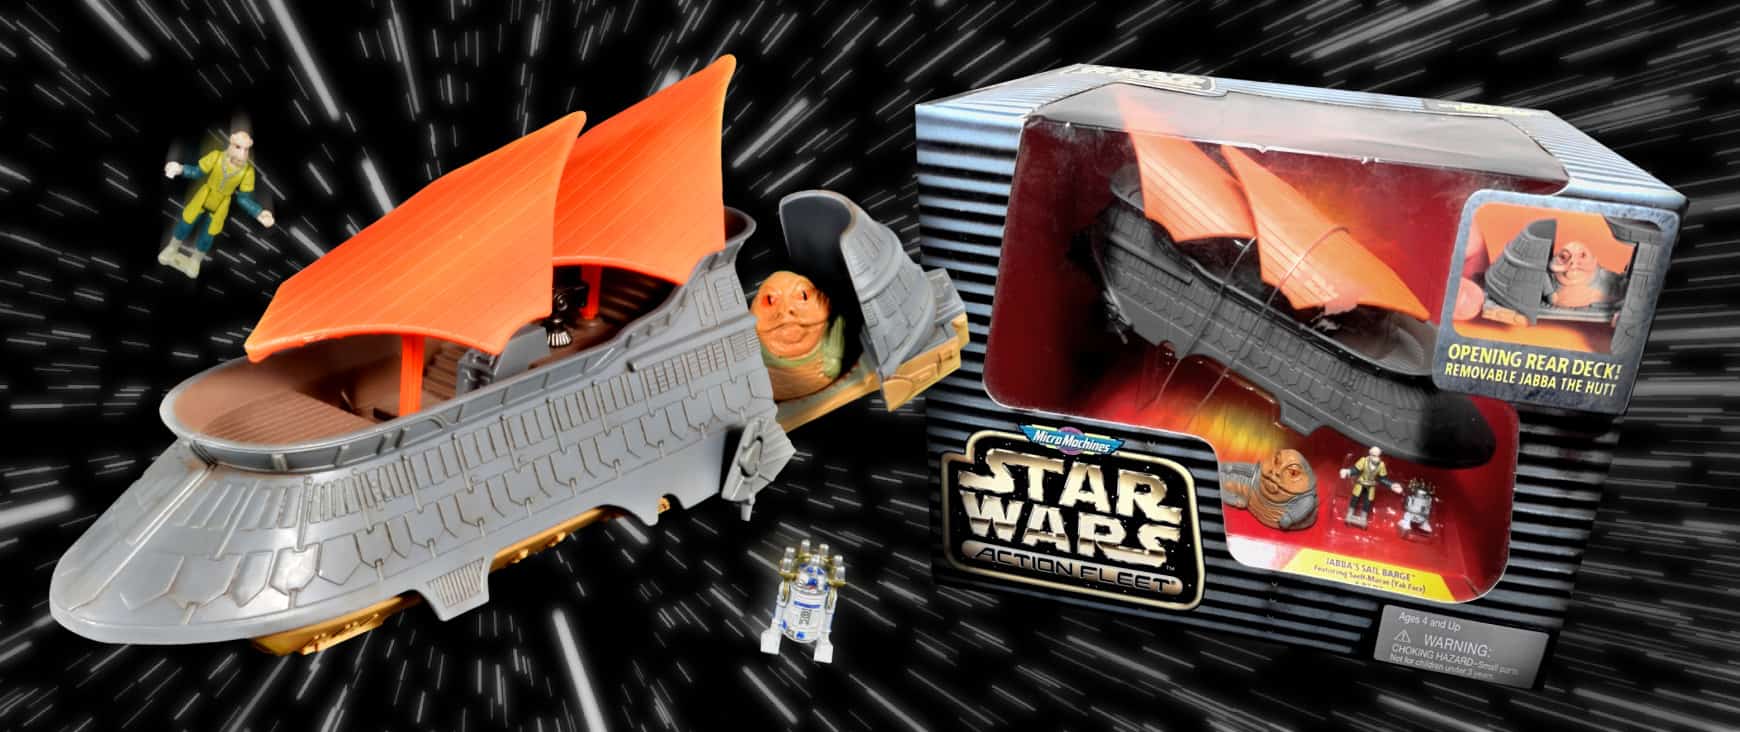 Star Wars Action Fleet Jabba’s Sail Barge released 1997